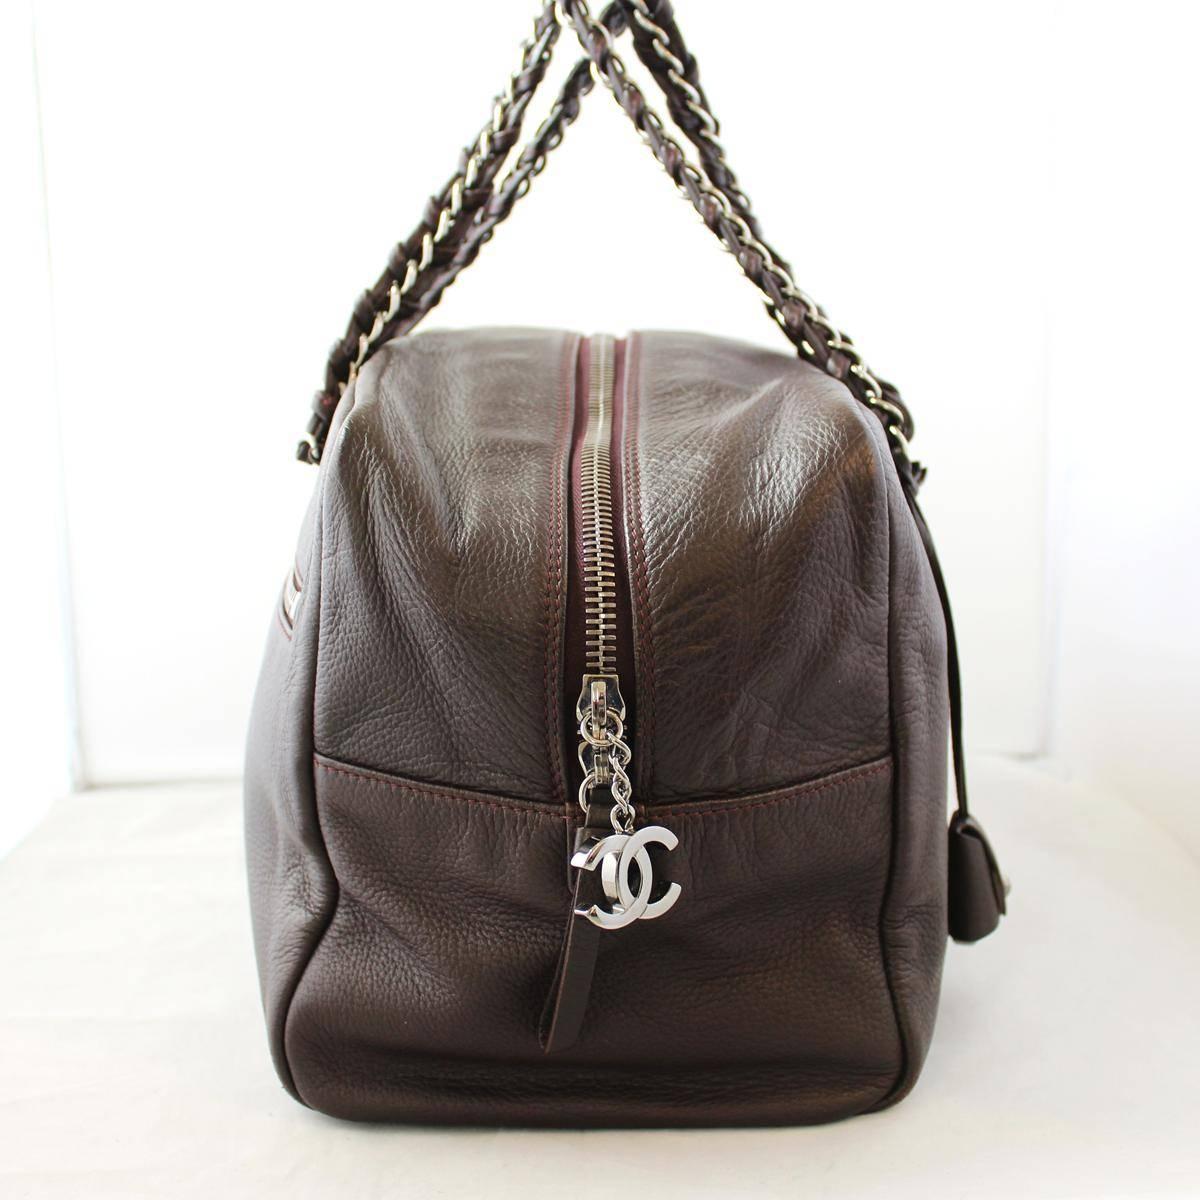 Iconic Chanel bag
2006 Collection
Internal serian n. 10866040
Deerskin leather
Prune color
Metal chain
Zip closure
Large external pocket
Two internal pockets (one with zip) and phone holder
Cm 33 x 22 x 16 (12.9 x 8.6 x 6.2 inches)
No card neither